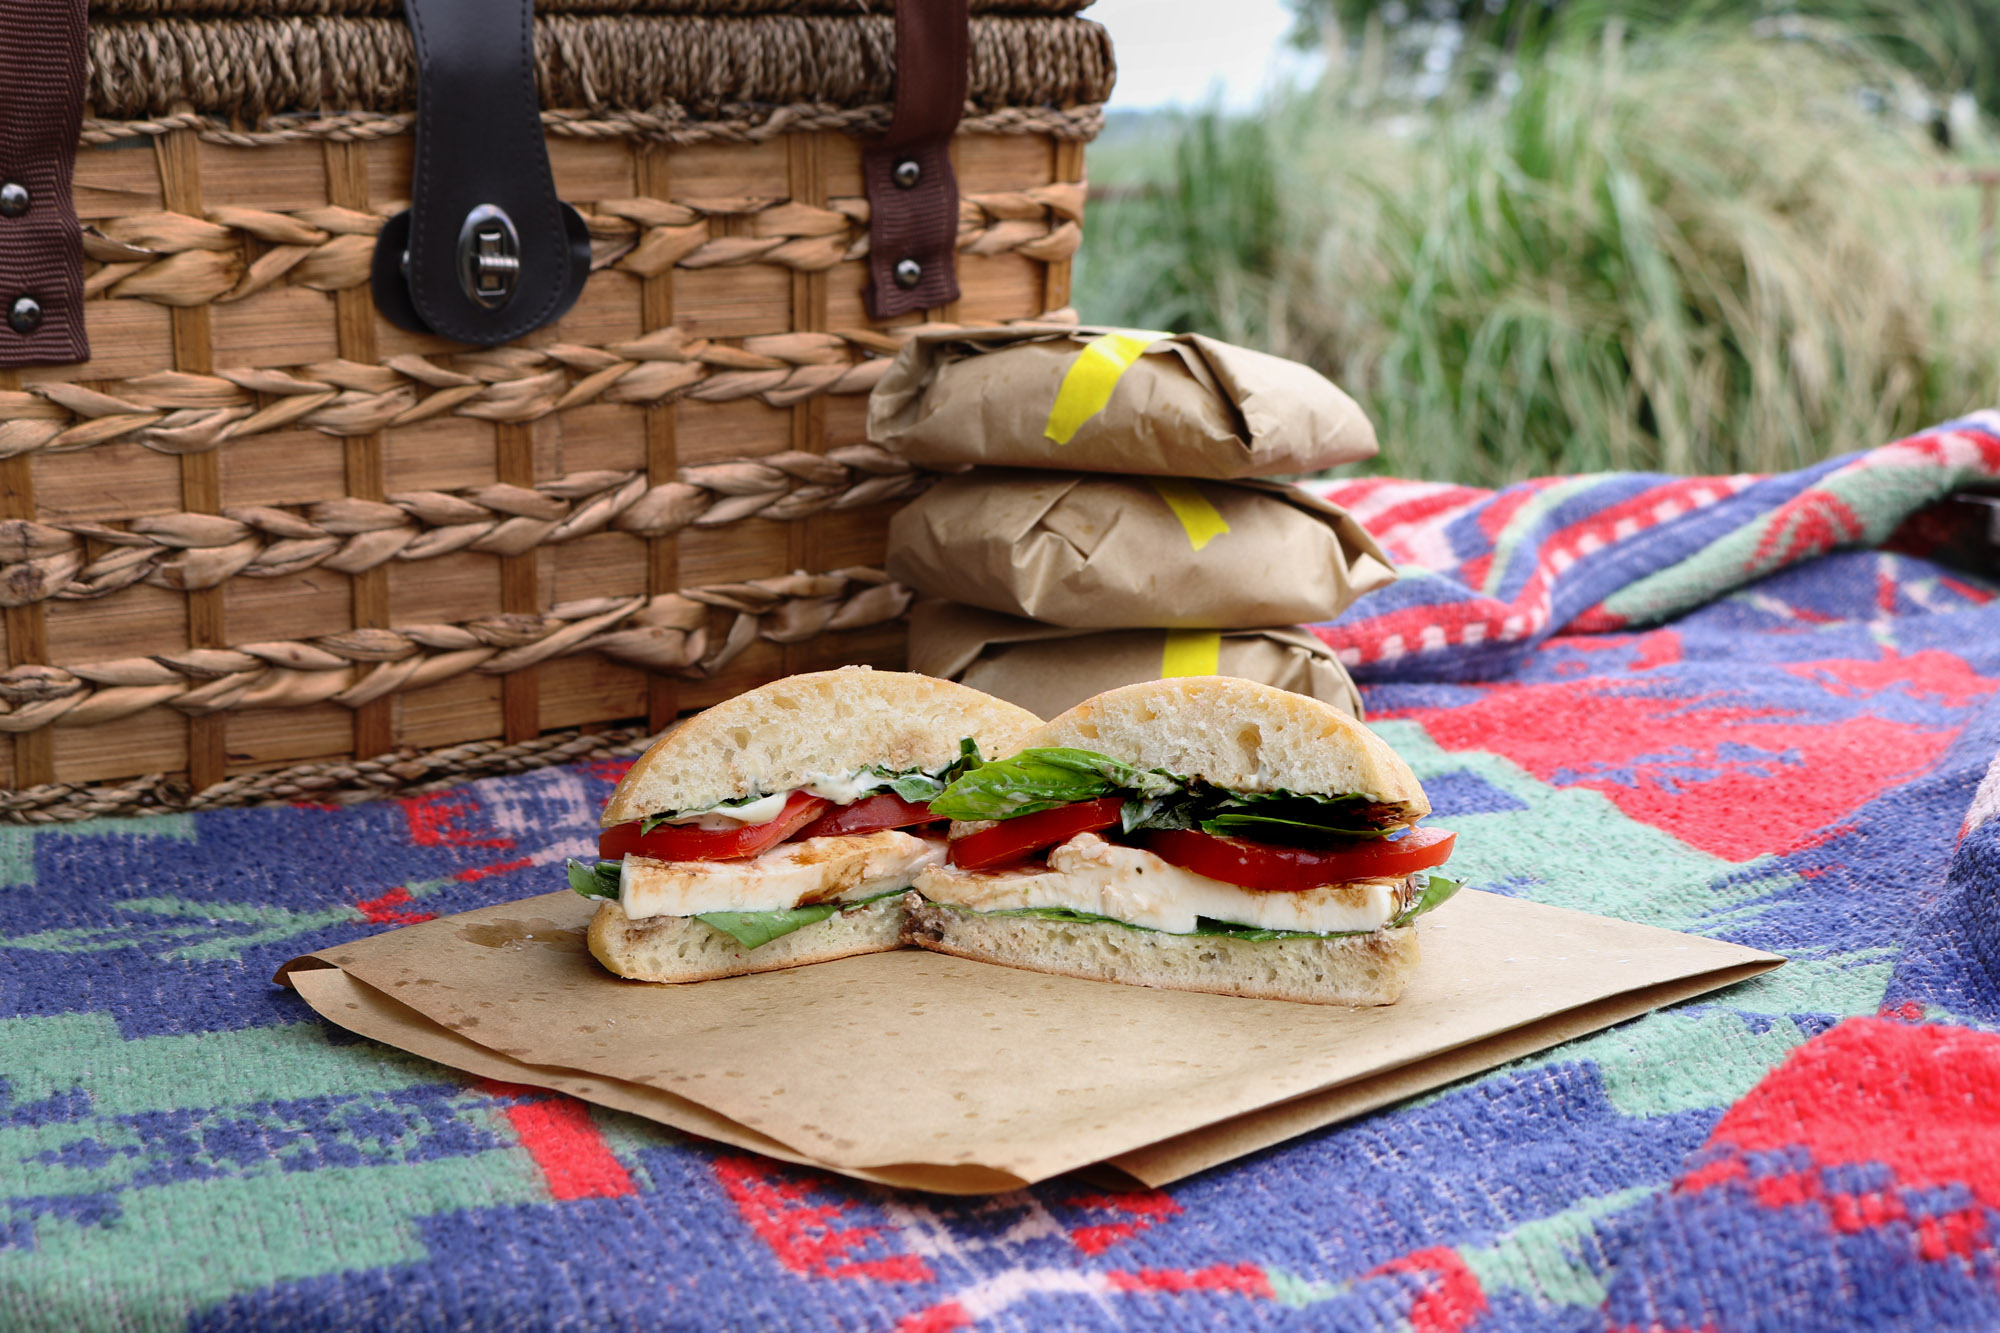 Caprese Sandwich recipe is perfect for picnics and lunch